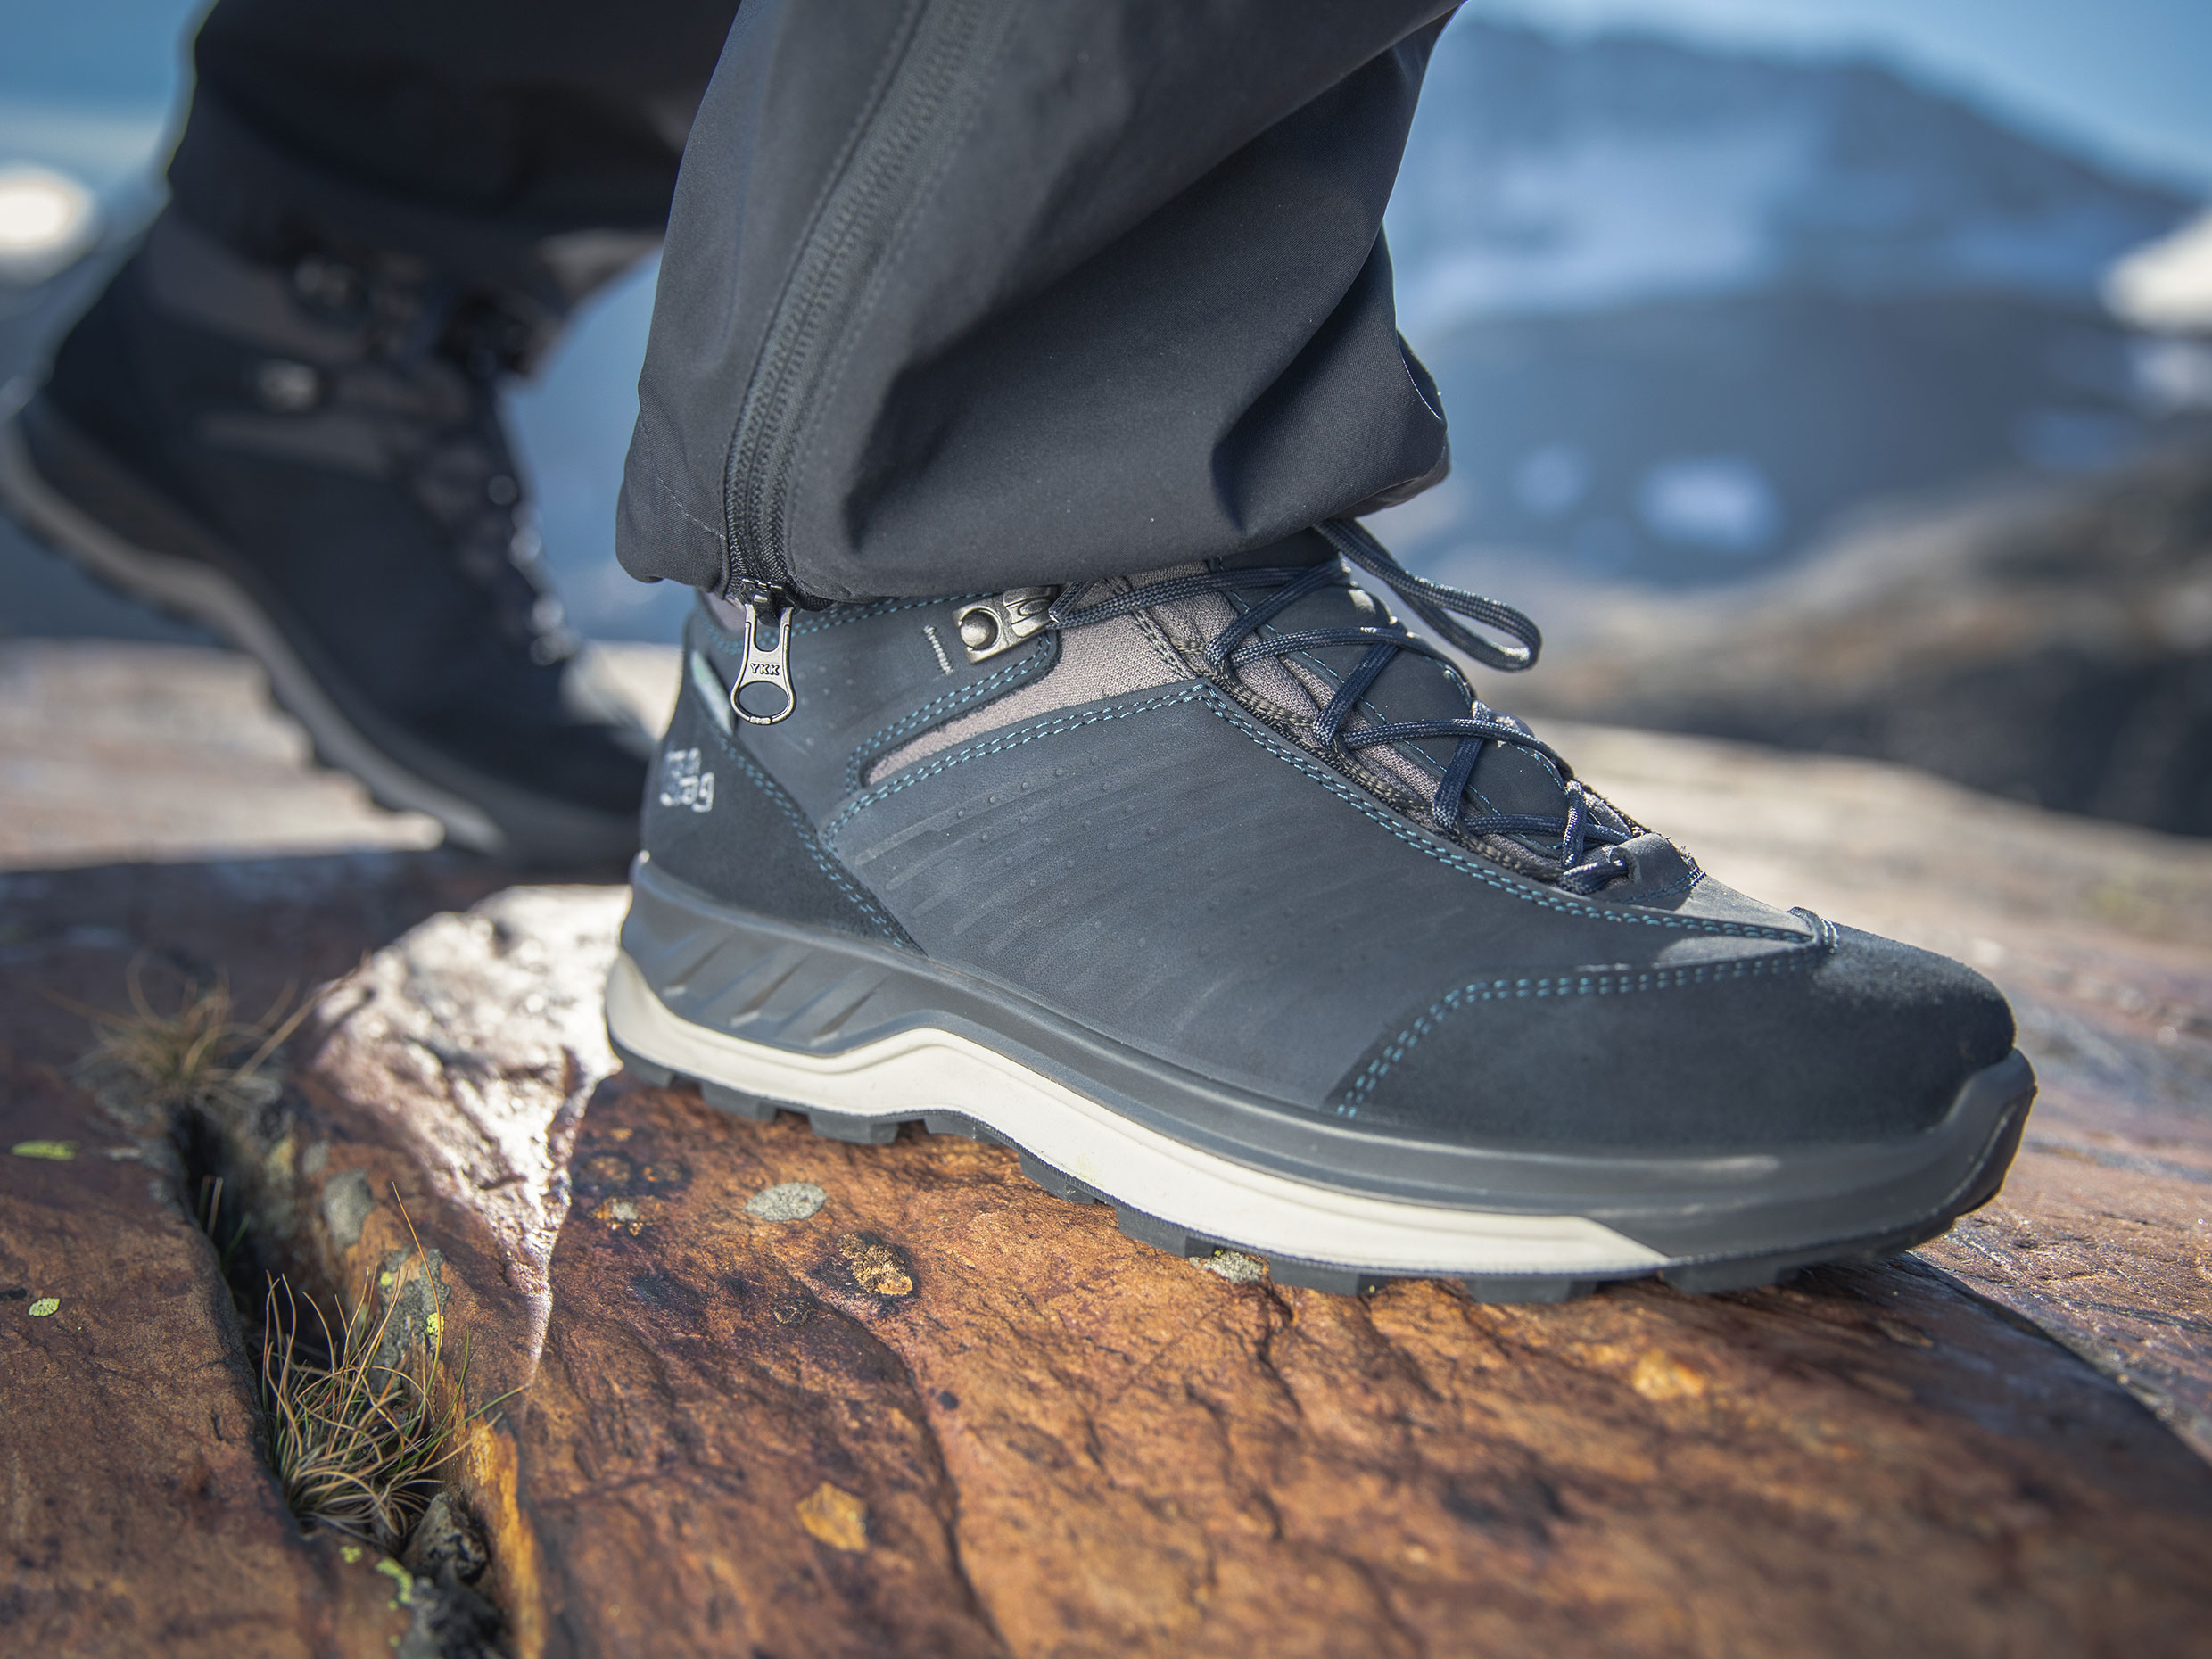 Hanwag Bluestrait ES is the ideal boot for a winter walk